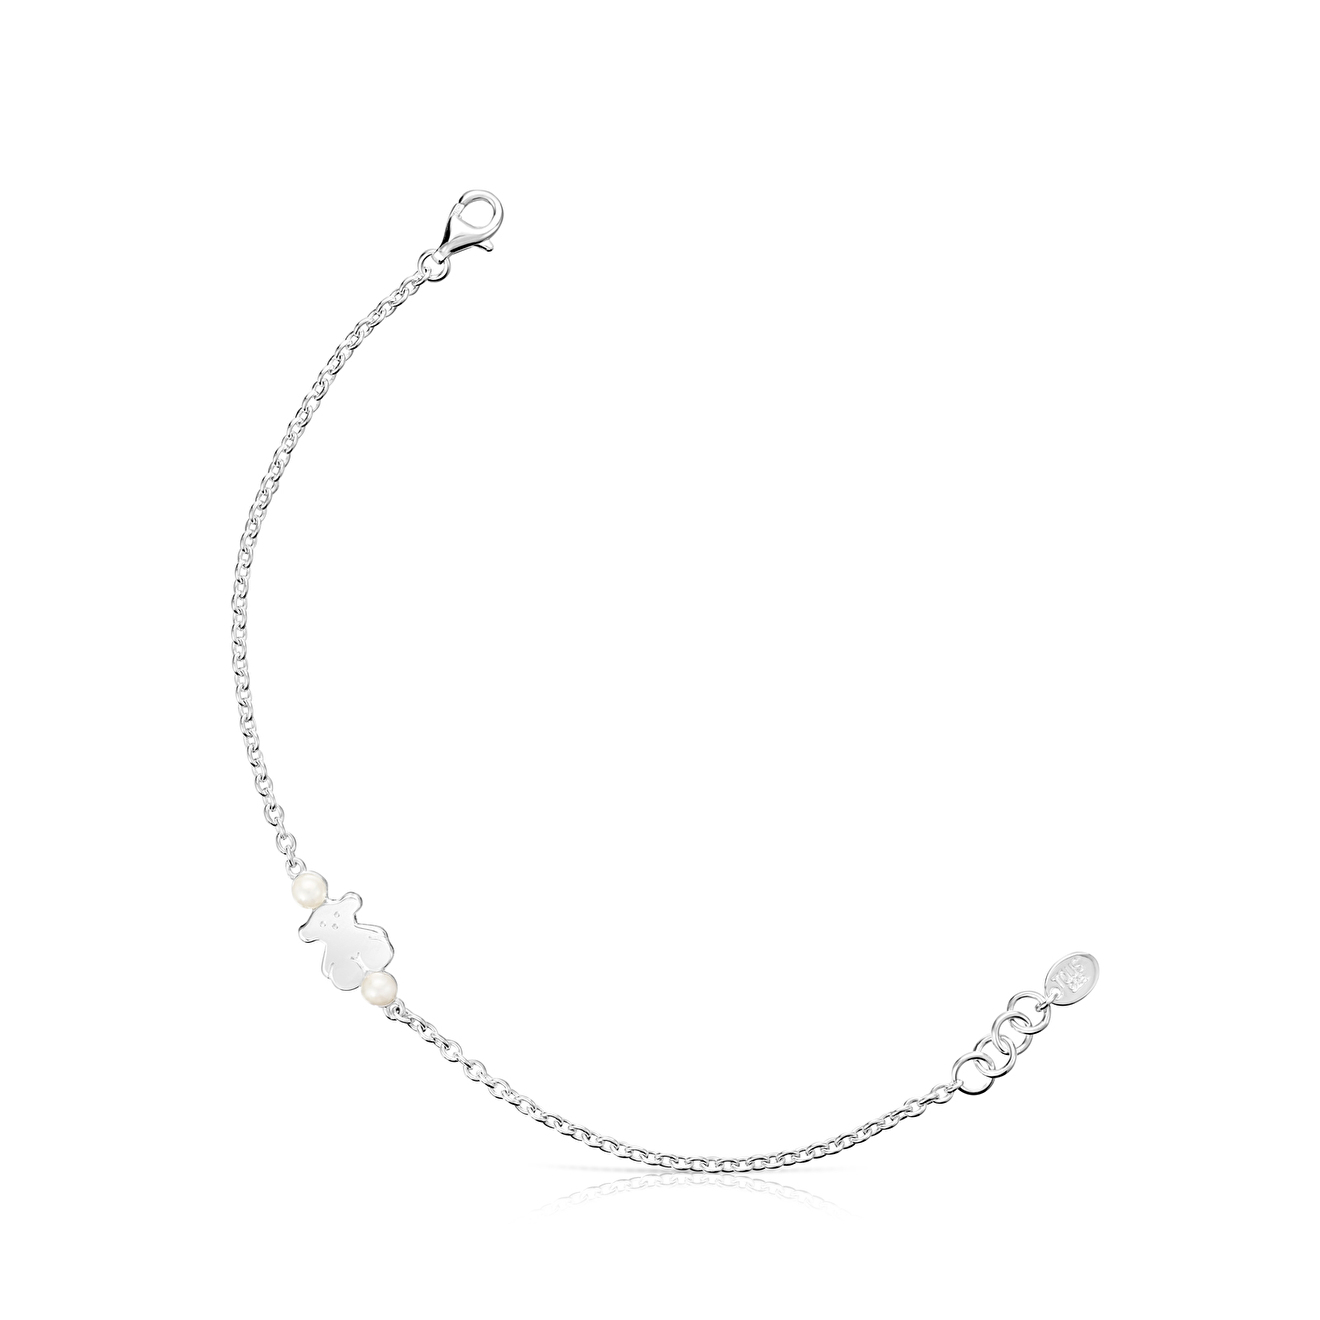 Real Sisy bracelet made of silver with pearls – buy at Poison Drop online  store, SKU